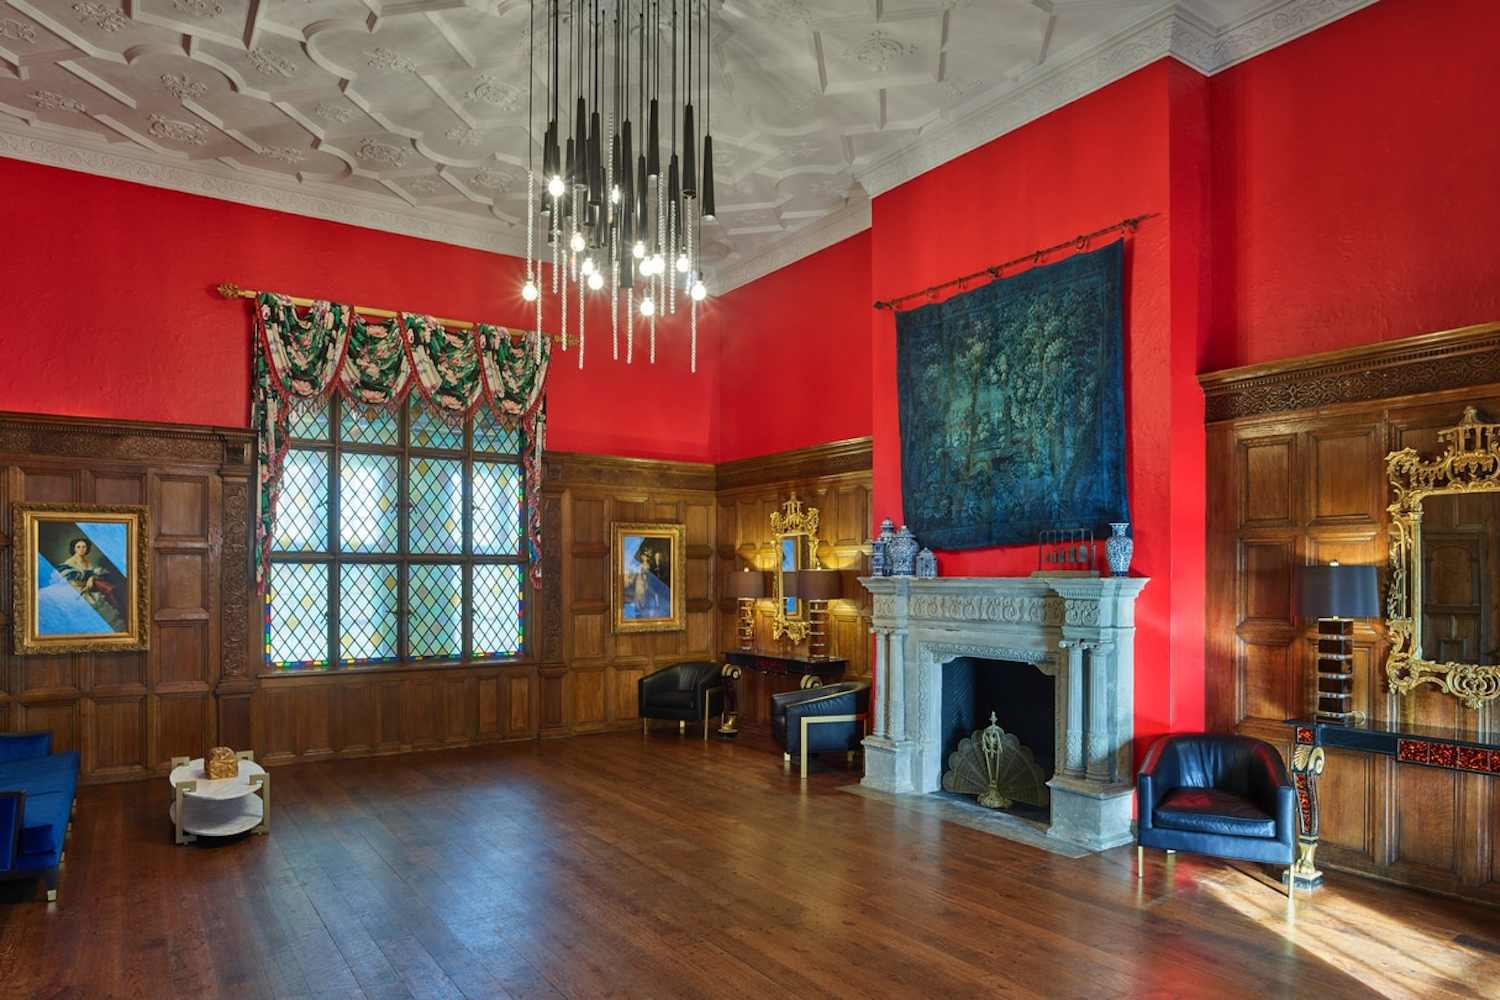 a room with bright red paint and older looking architecture.